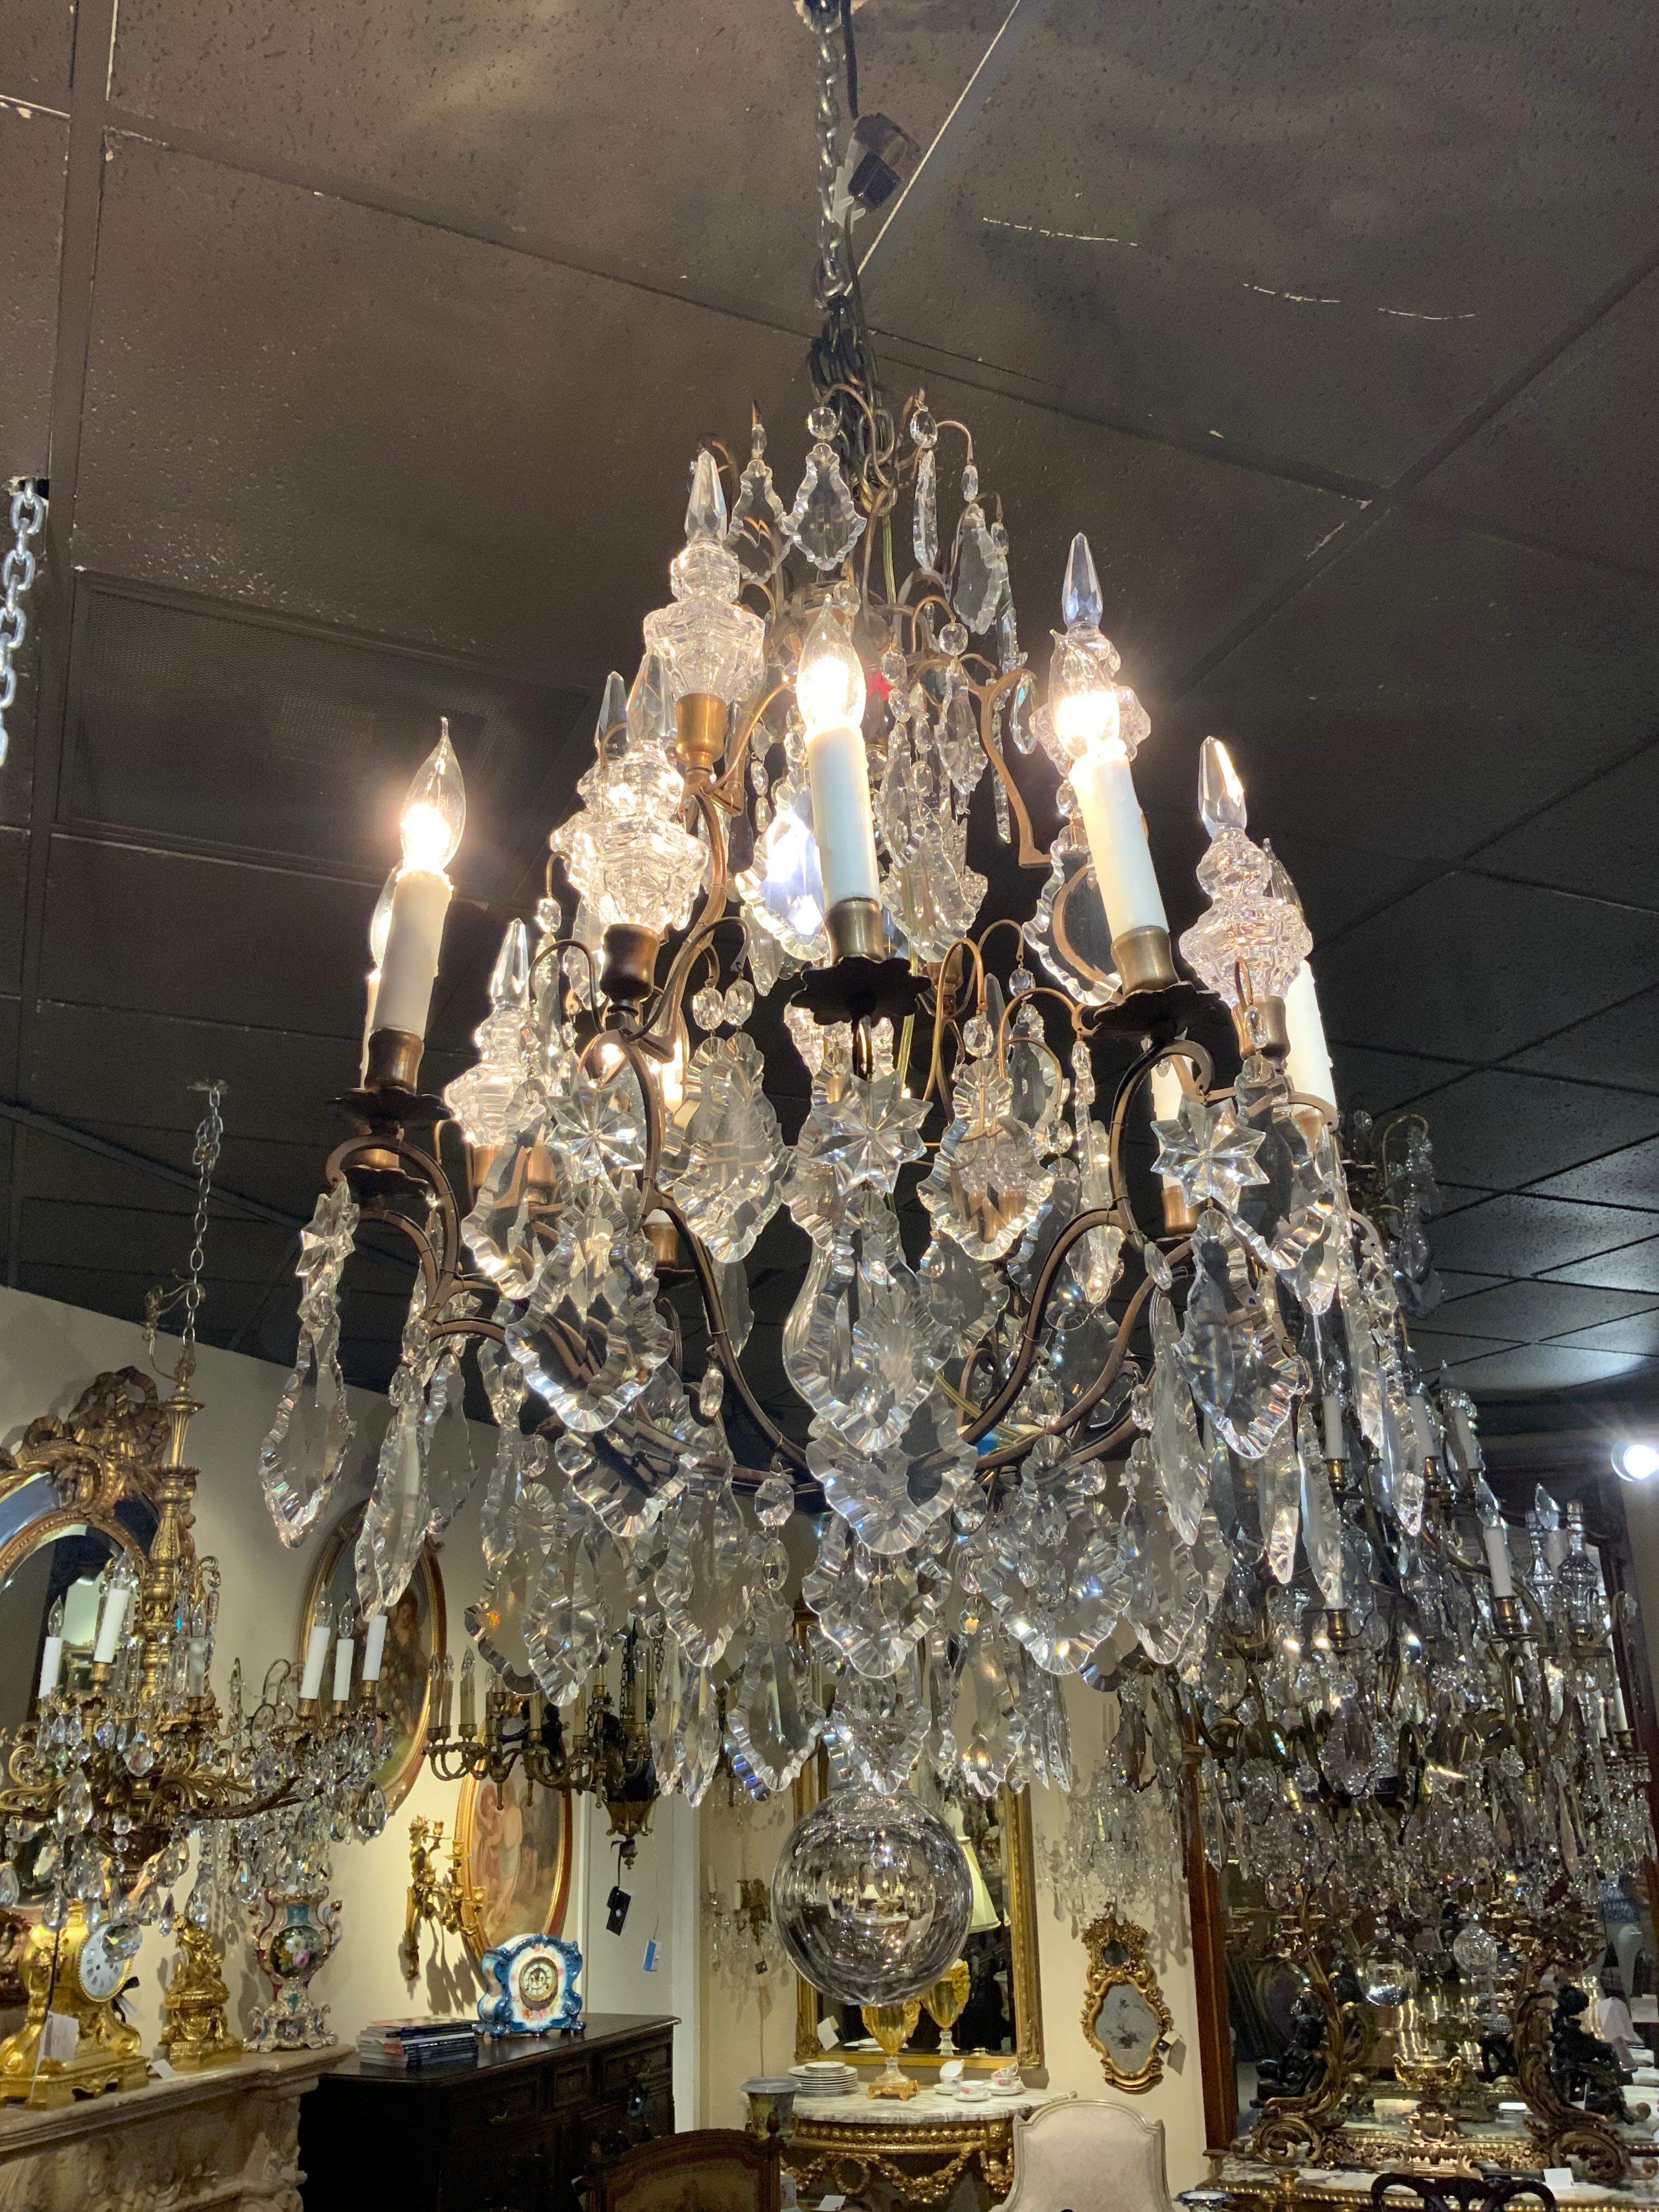 The crystal is clear and no missing or chipped pieces. It has tall elegant
Spires in the baccarat style. It has eight lights and the wiring is good.
